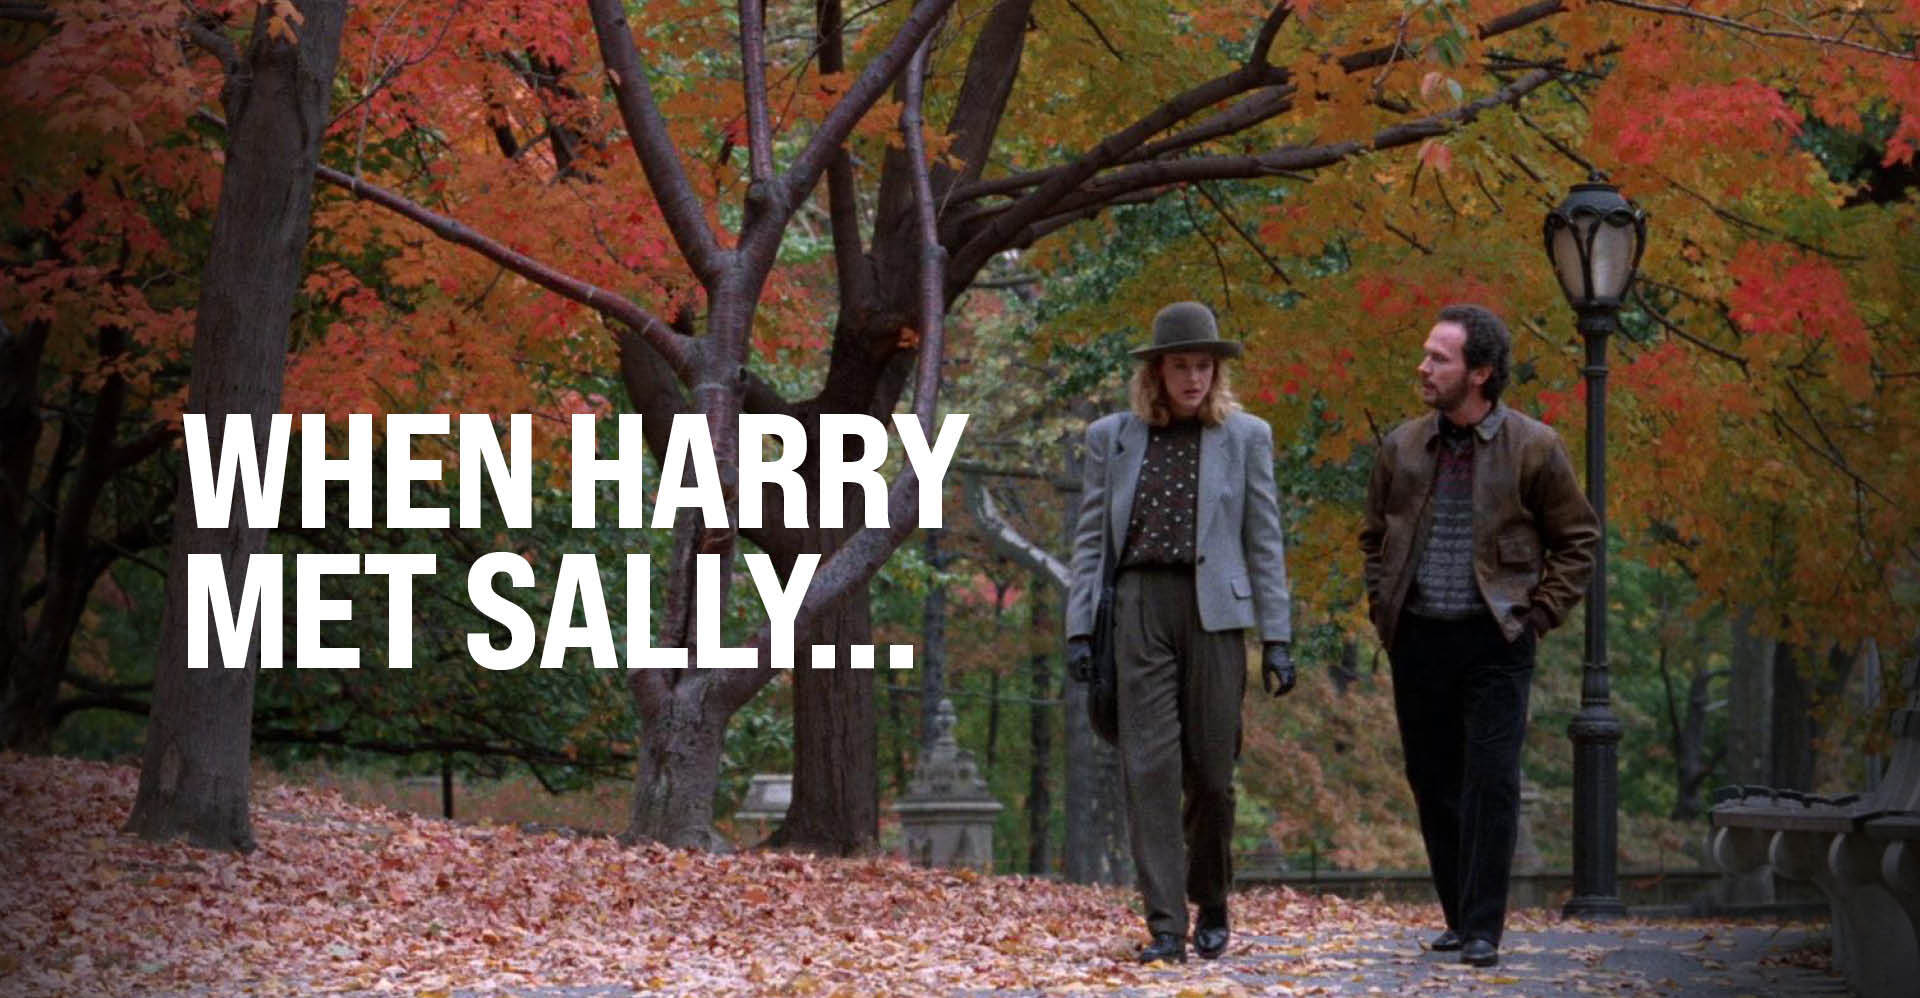 49-facts-about-the-movie-when-harry-met-sally